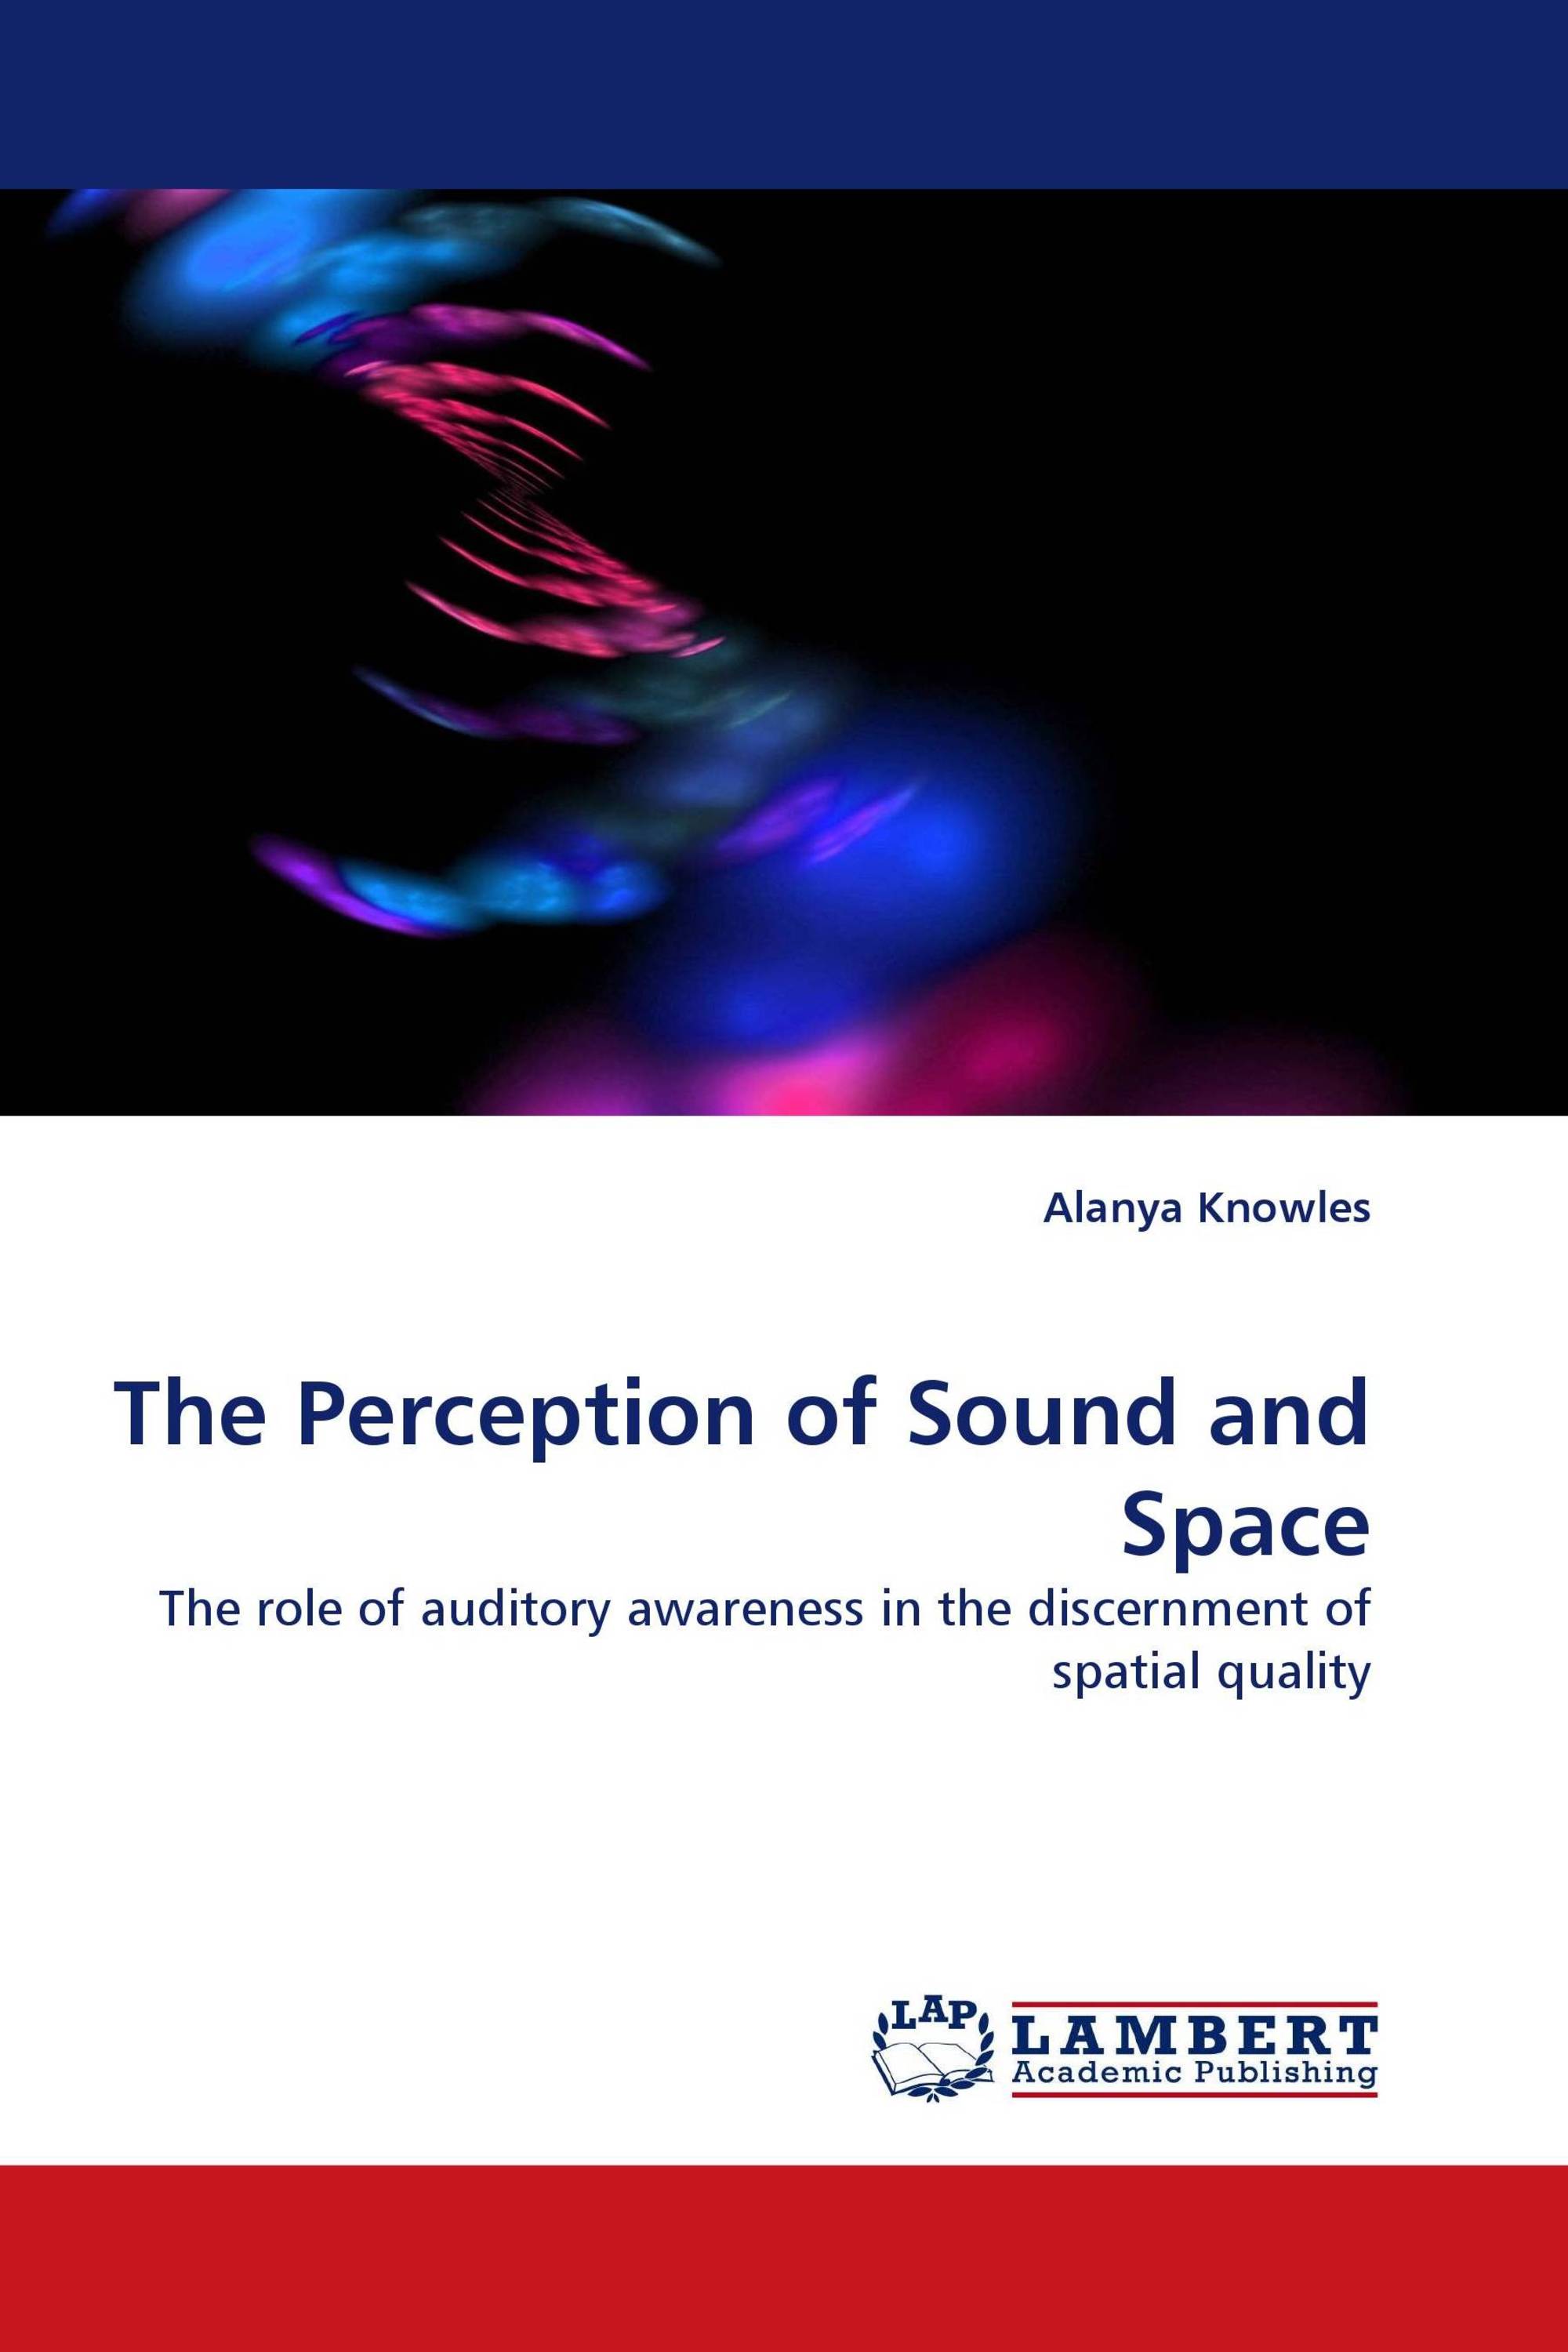 The Perception of Sound and Space